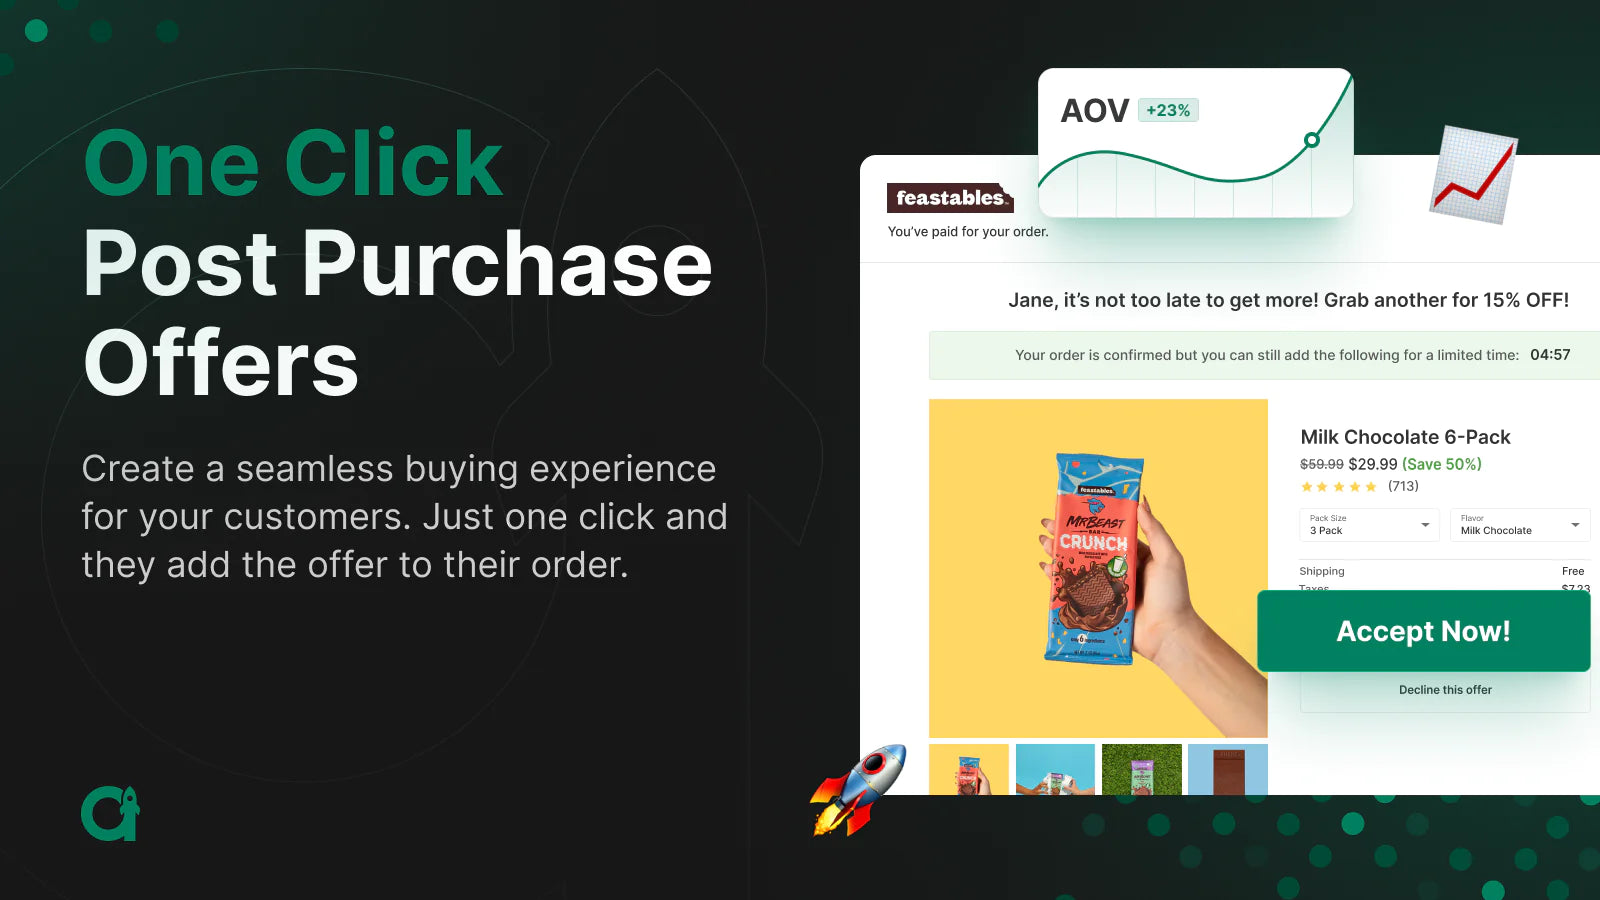 the image shows that you can create a seamless buying experience just one click